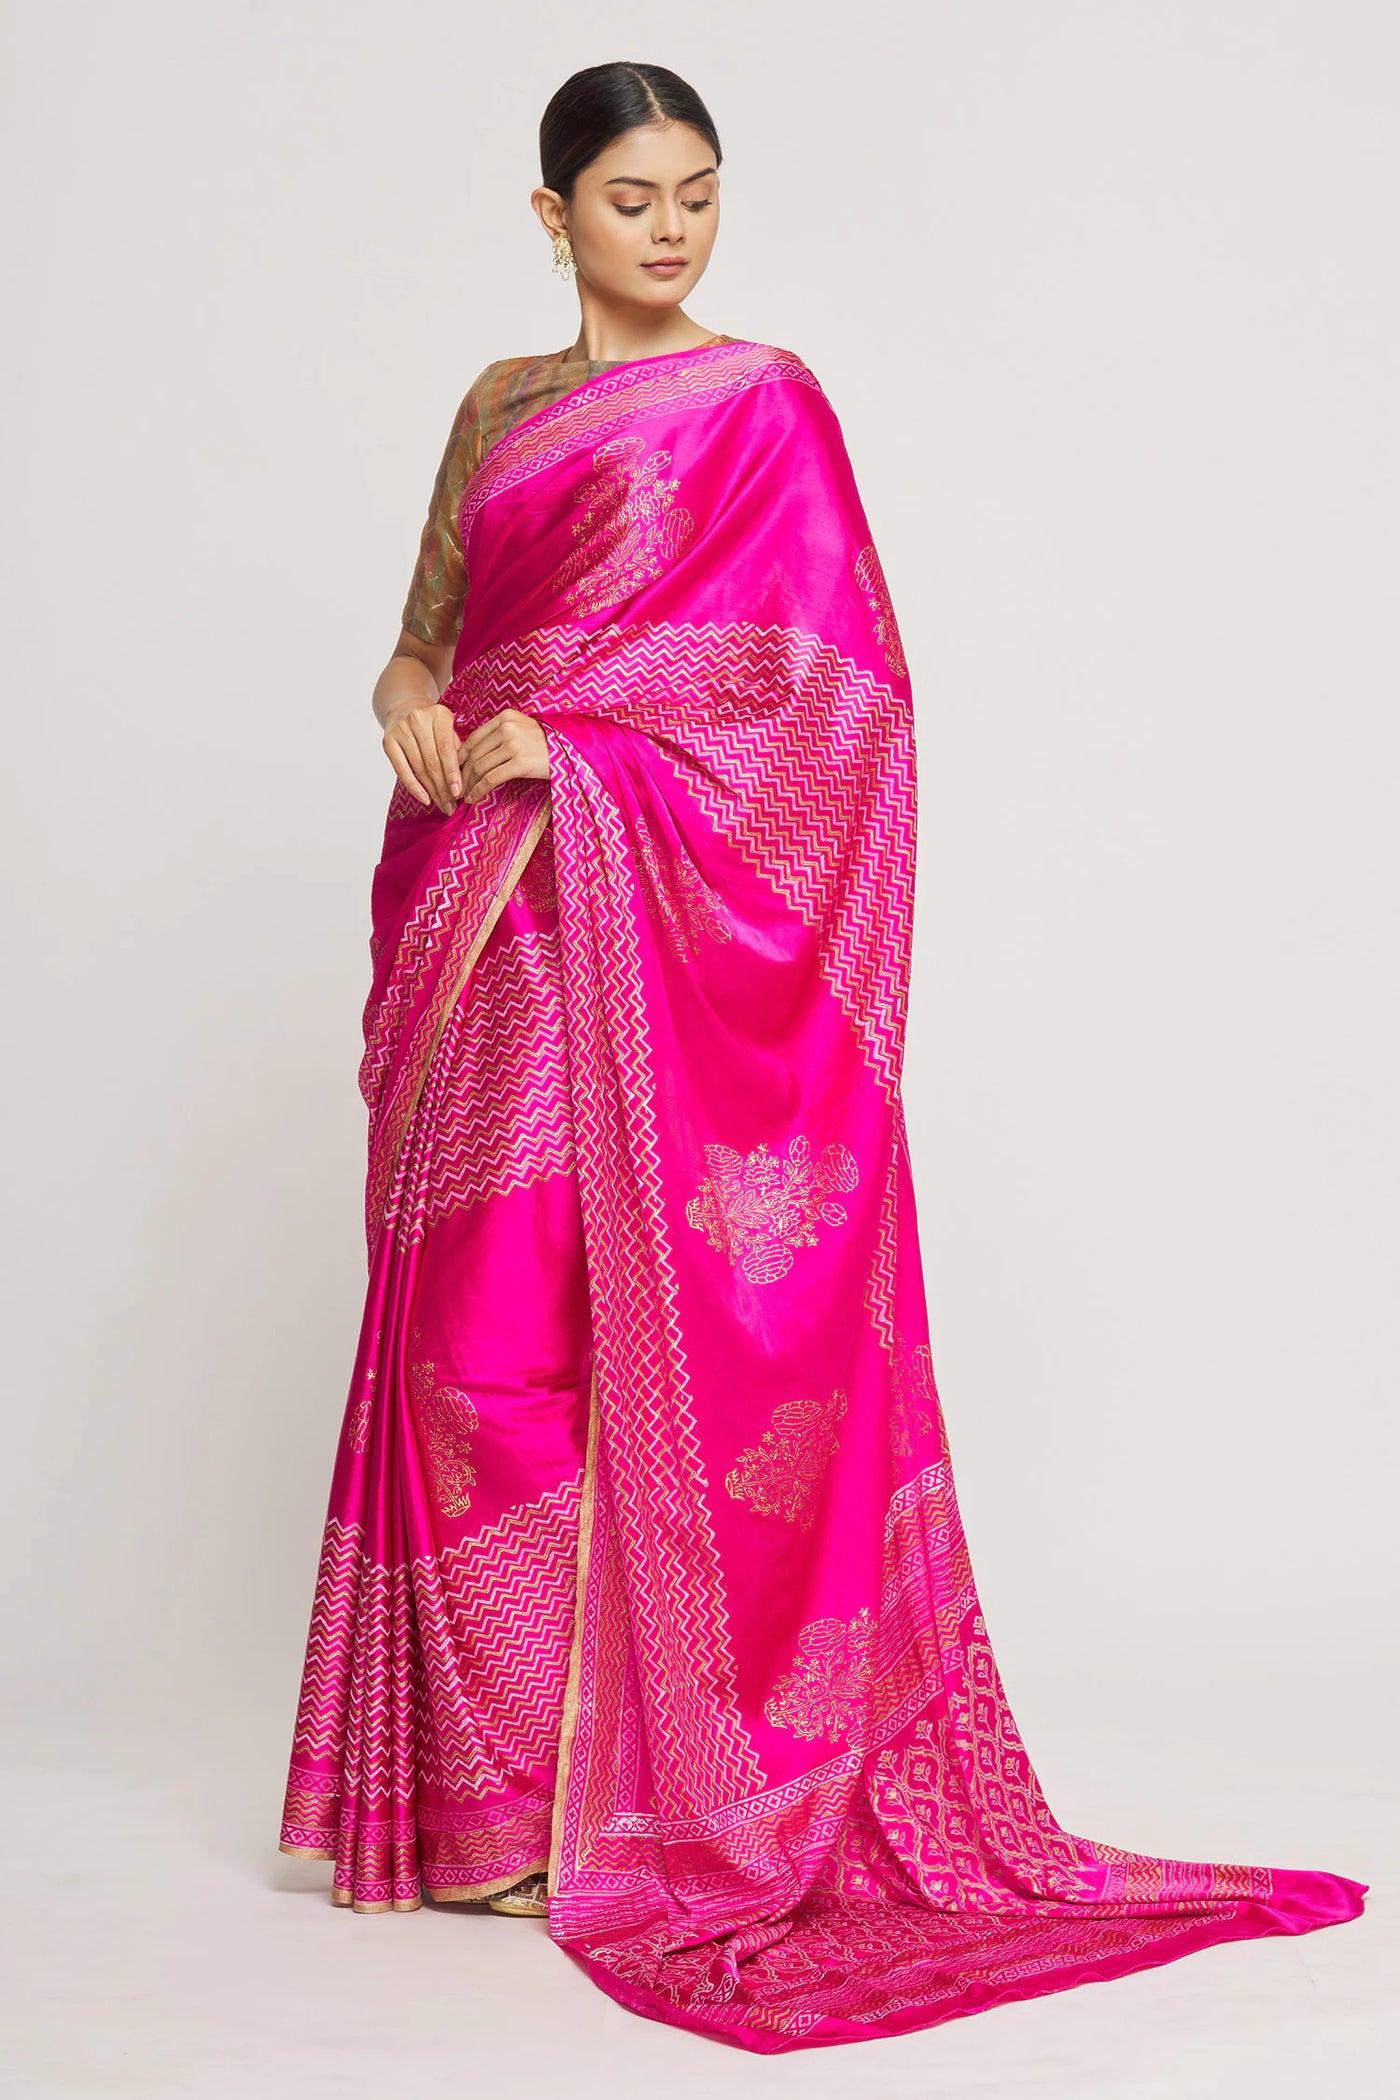 Pink Madras Silk Saree - Indian Clothing in Denver, CO, Aurora, CO, Boulder, CO, Fort Collins, CO, Colorado Springs, CO, Parker, CO, Highlands Ranch, CO, Cherry Creek, CO, Centennial, CO, and Longmont, CO. Nationwide shipping USA - India Fashion X